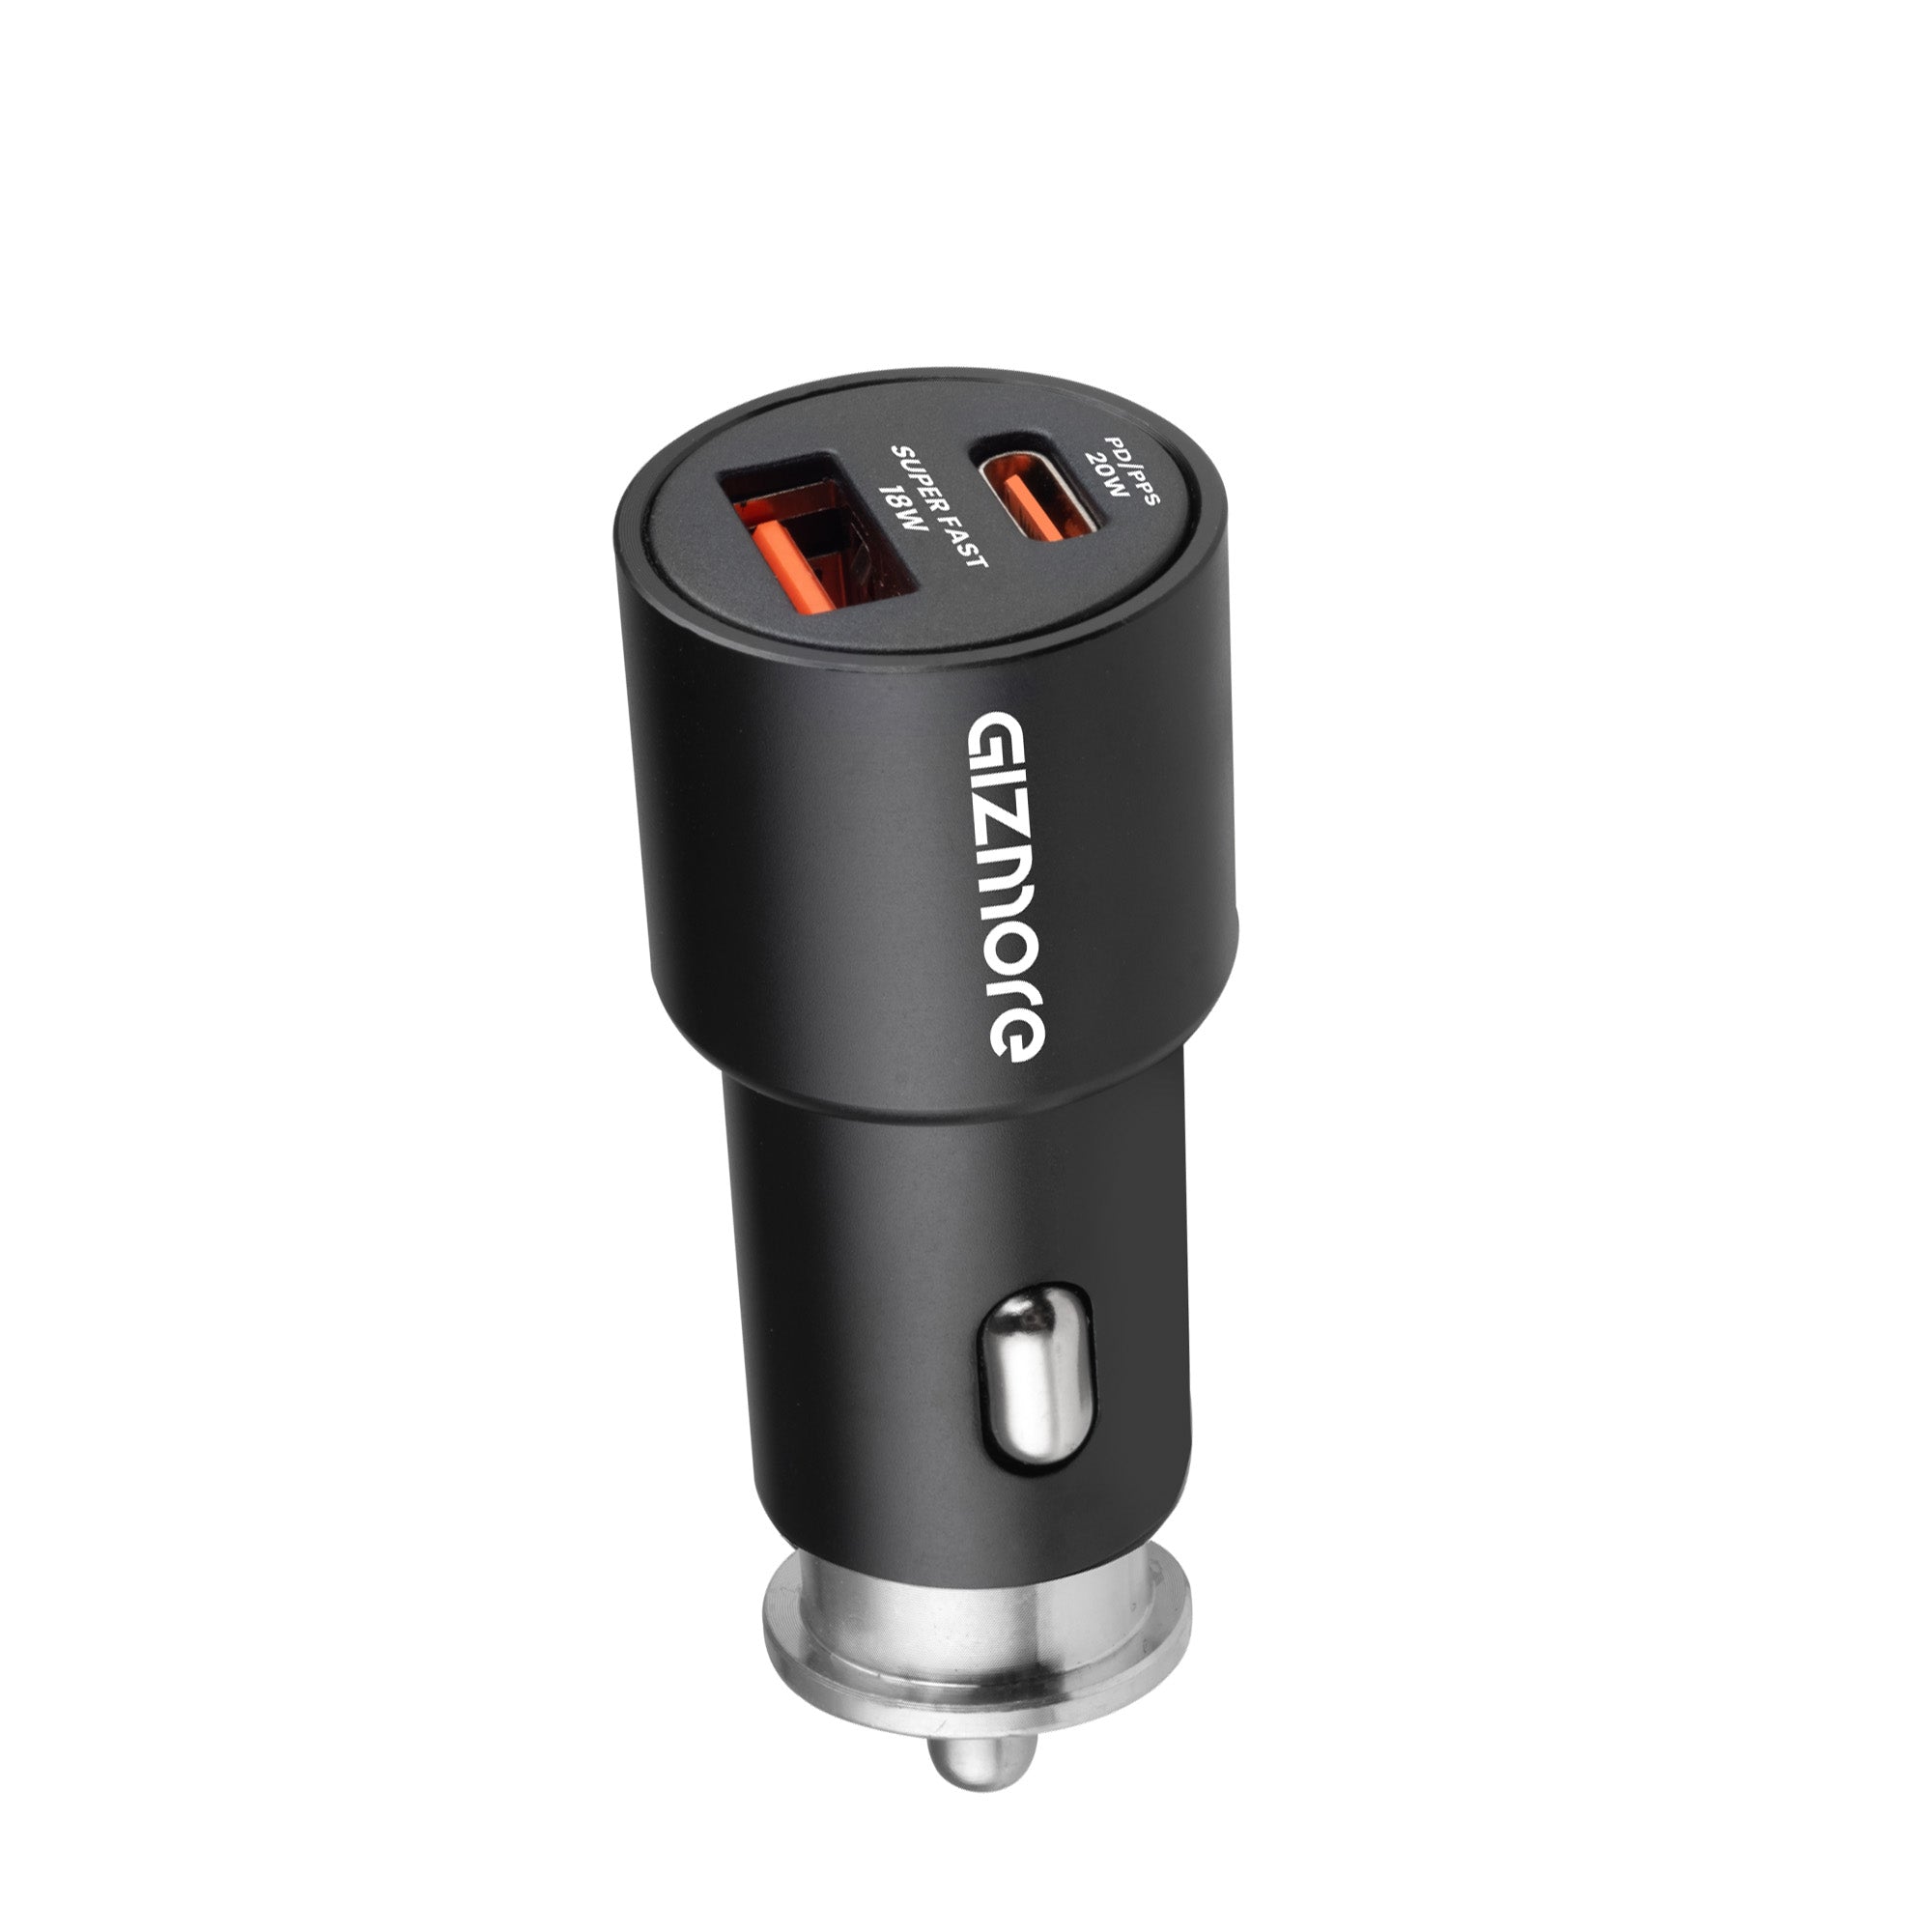 GIZMORE 38W Super-Fast Car Charger with Dual Output, 38 Watts Total (18W USB + 20W Type C PD), Fast Charging, Adapter for iPhone & Android Smartphones (Black)